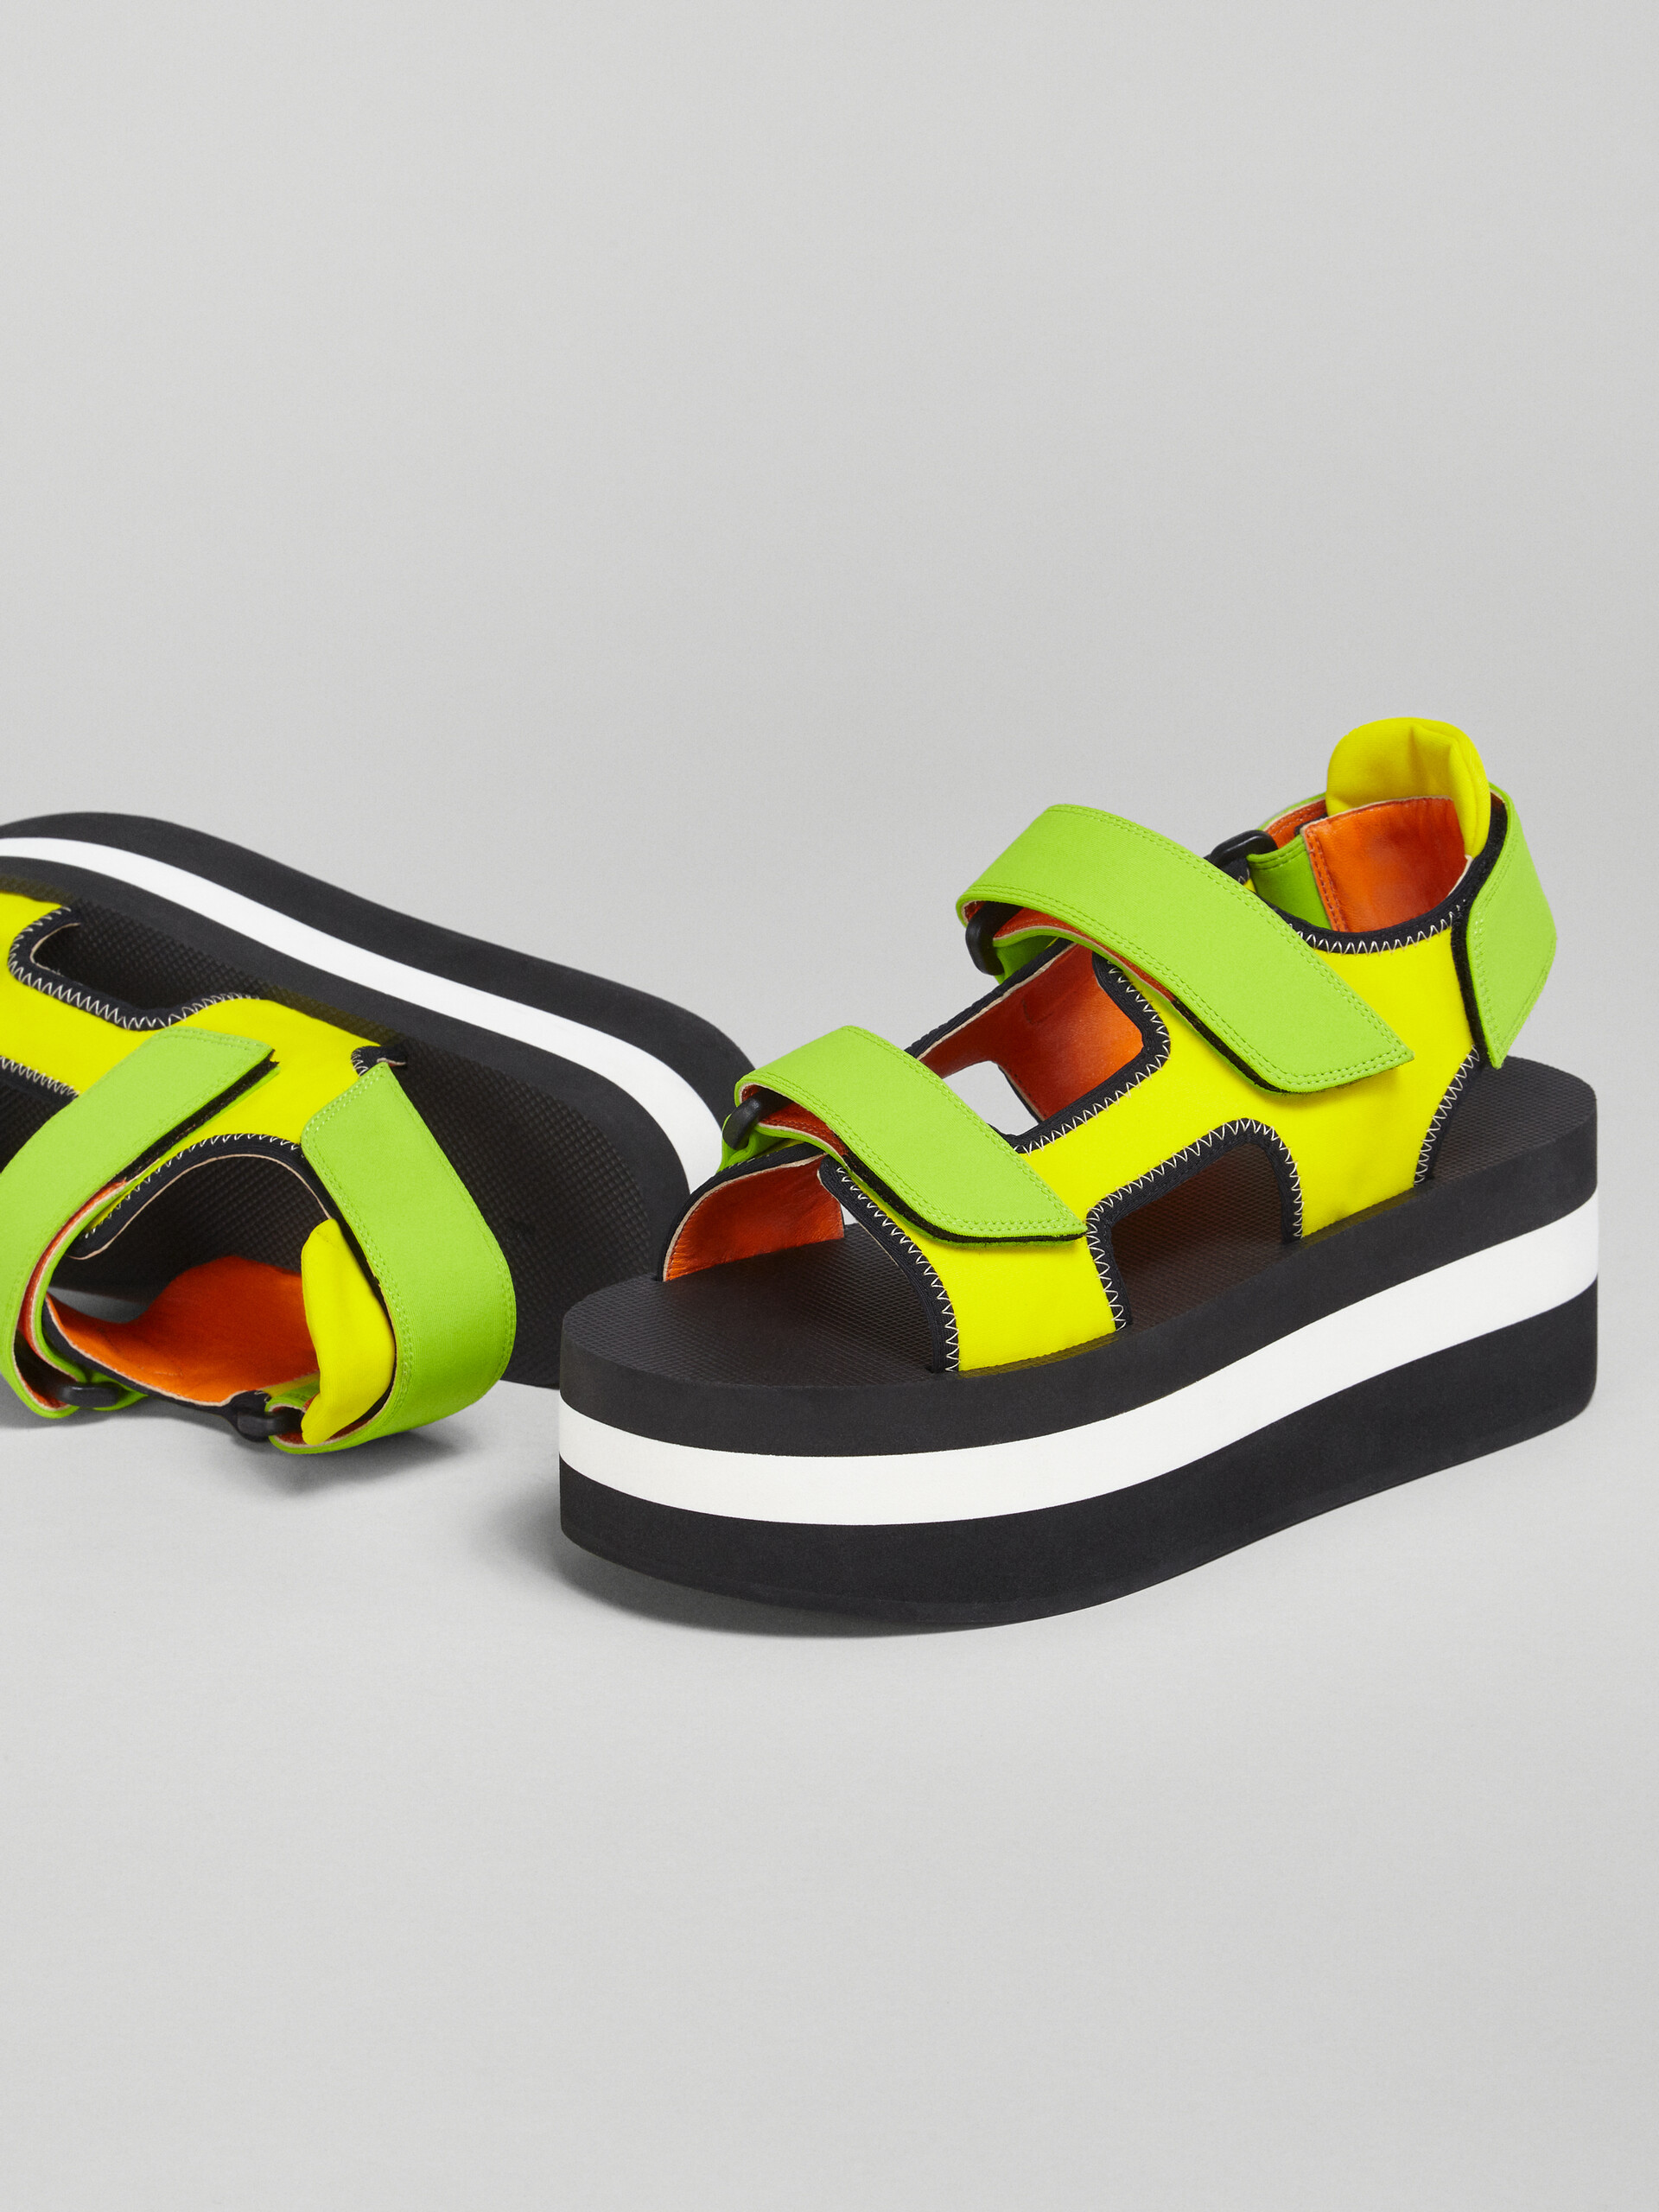 Yellow and green technical fabric sandal - Sandals - Image 5